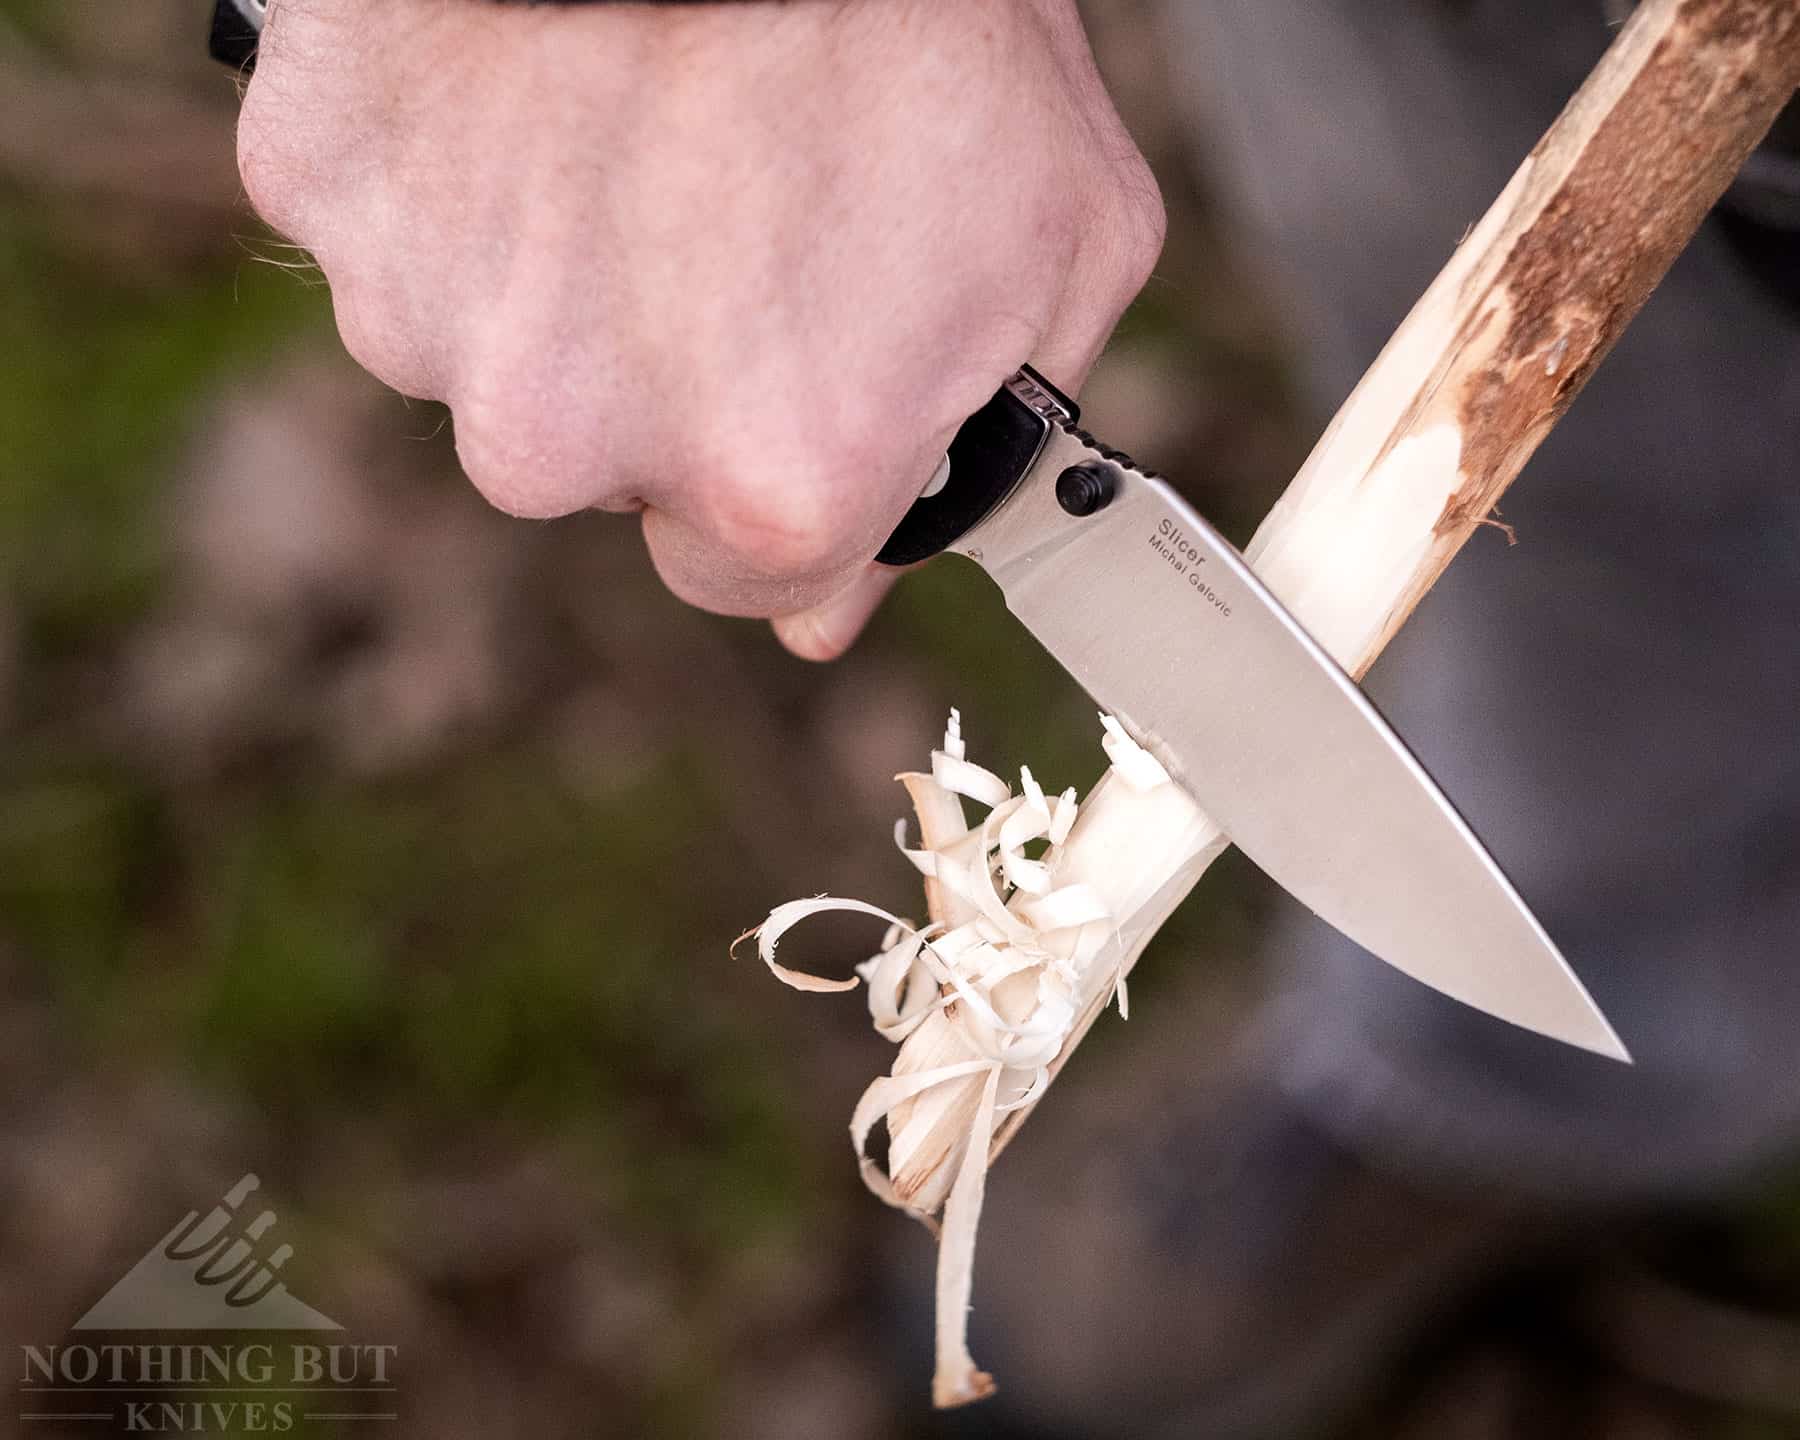 Carving a feather stick with the Kizer Slicer Lockback. 